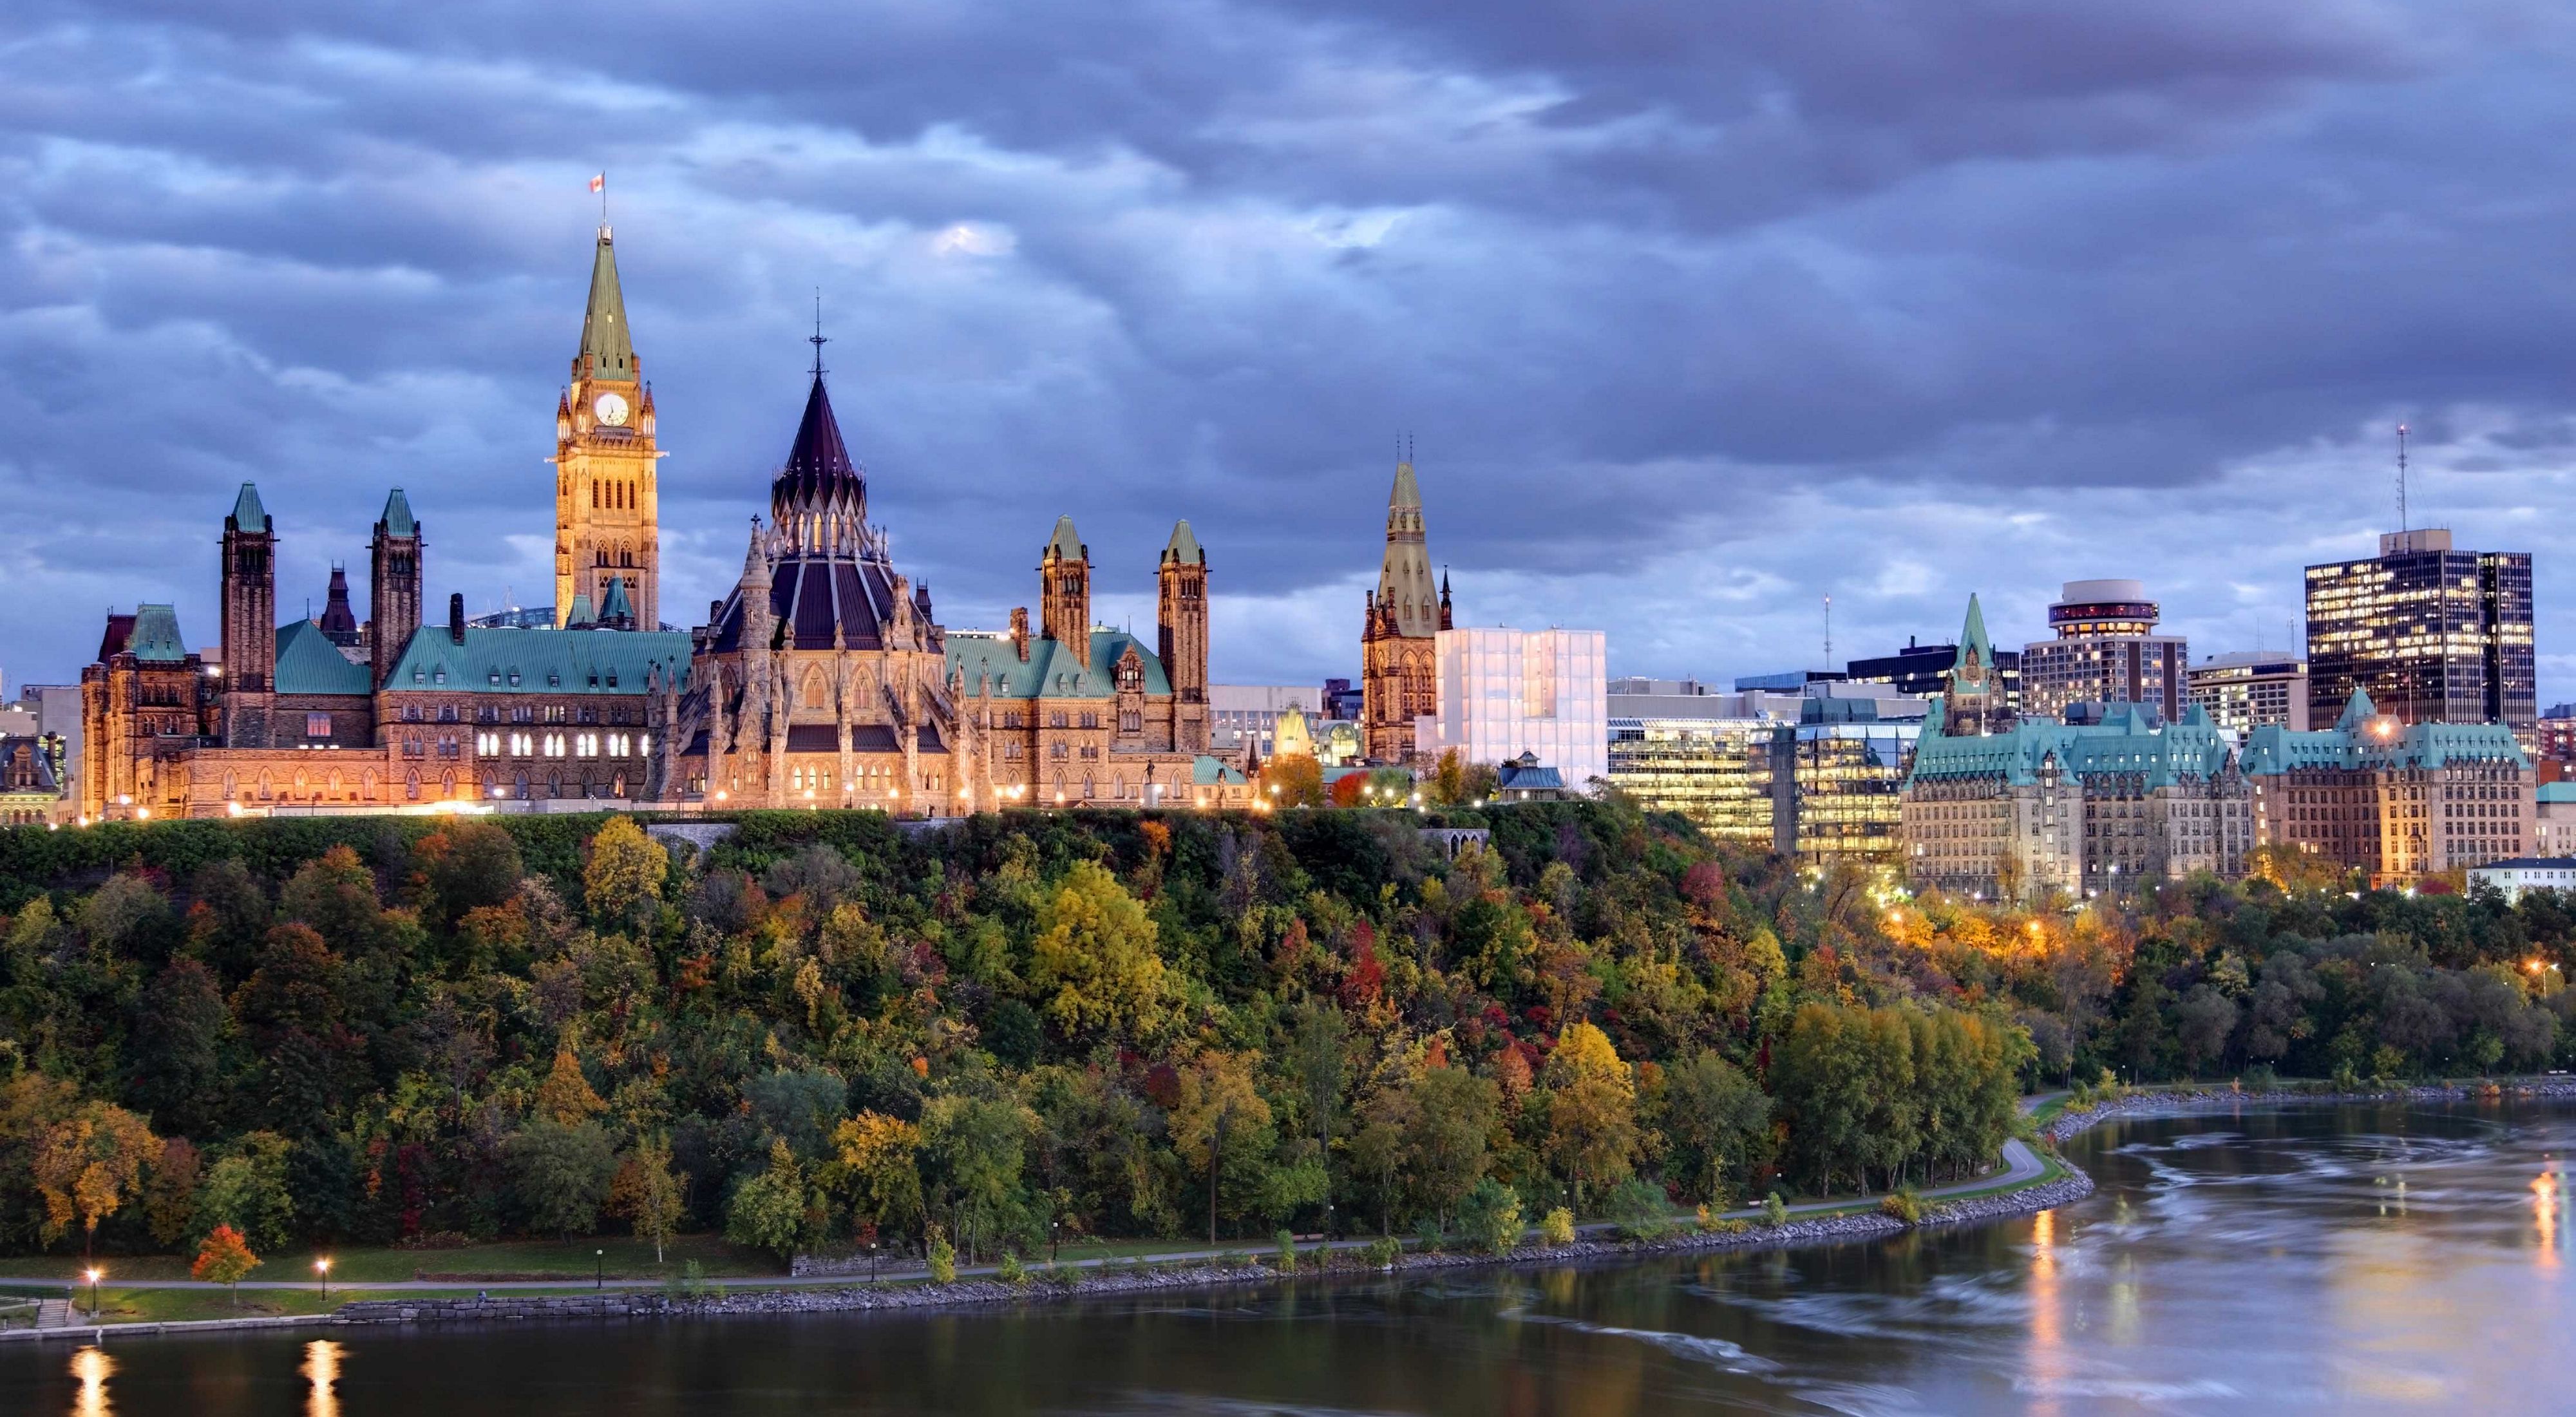 Parliament Hill atop a dramatic hill overlooking the Ottawa River in Ottawa, Ontario in autumn.